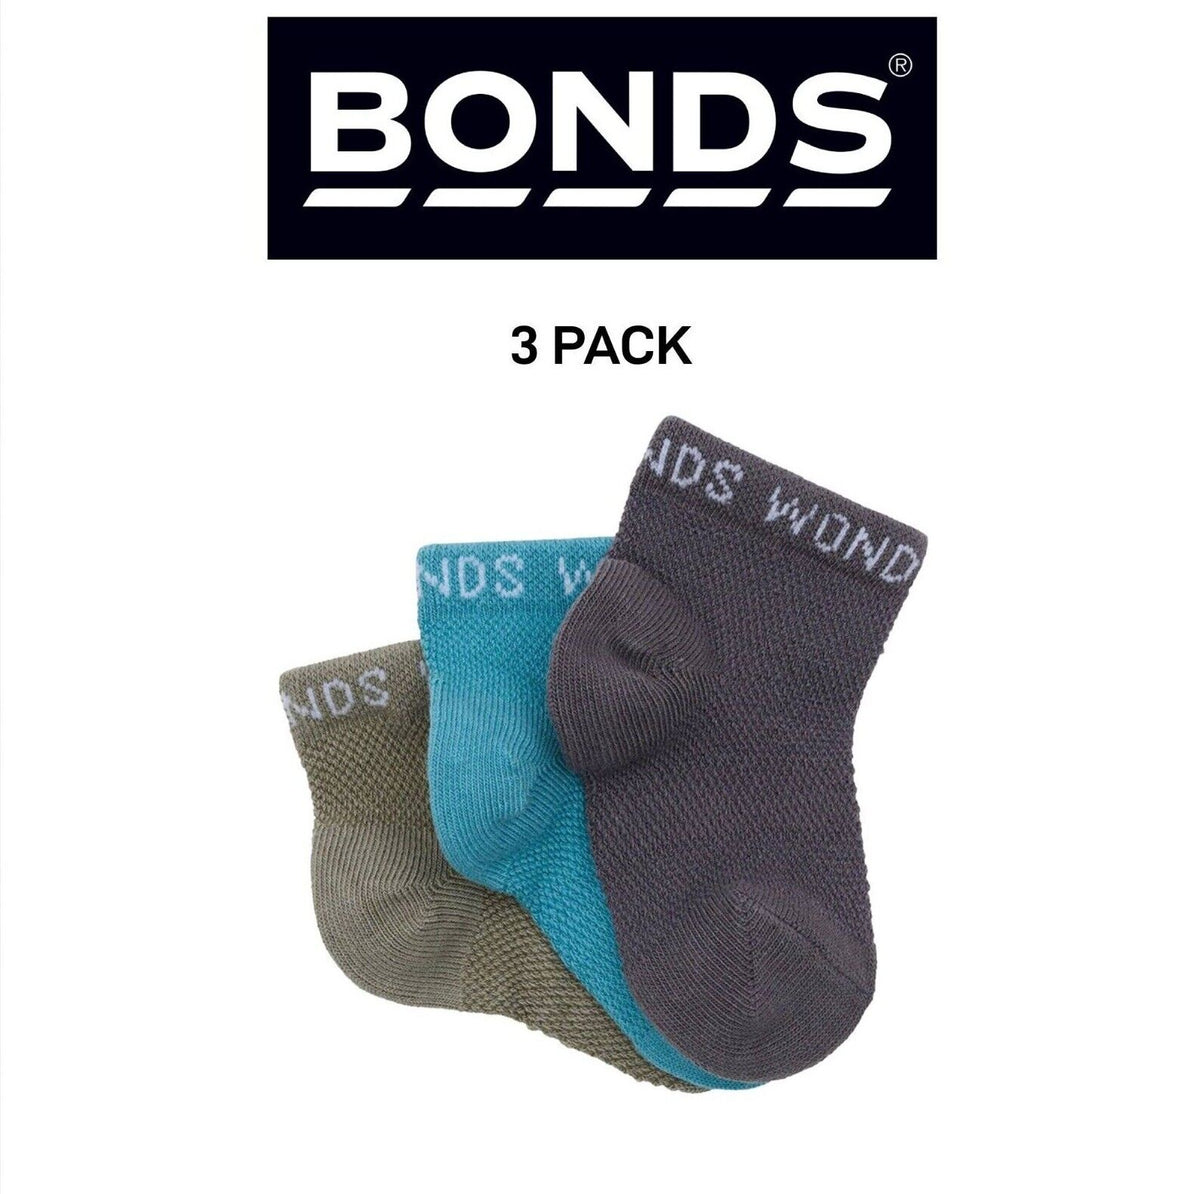 Bonds Baby Wondercool Low Cut Socks Breathable Soft Natural Cotton 3 Pack RXWN3N